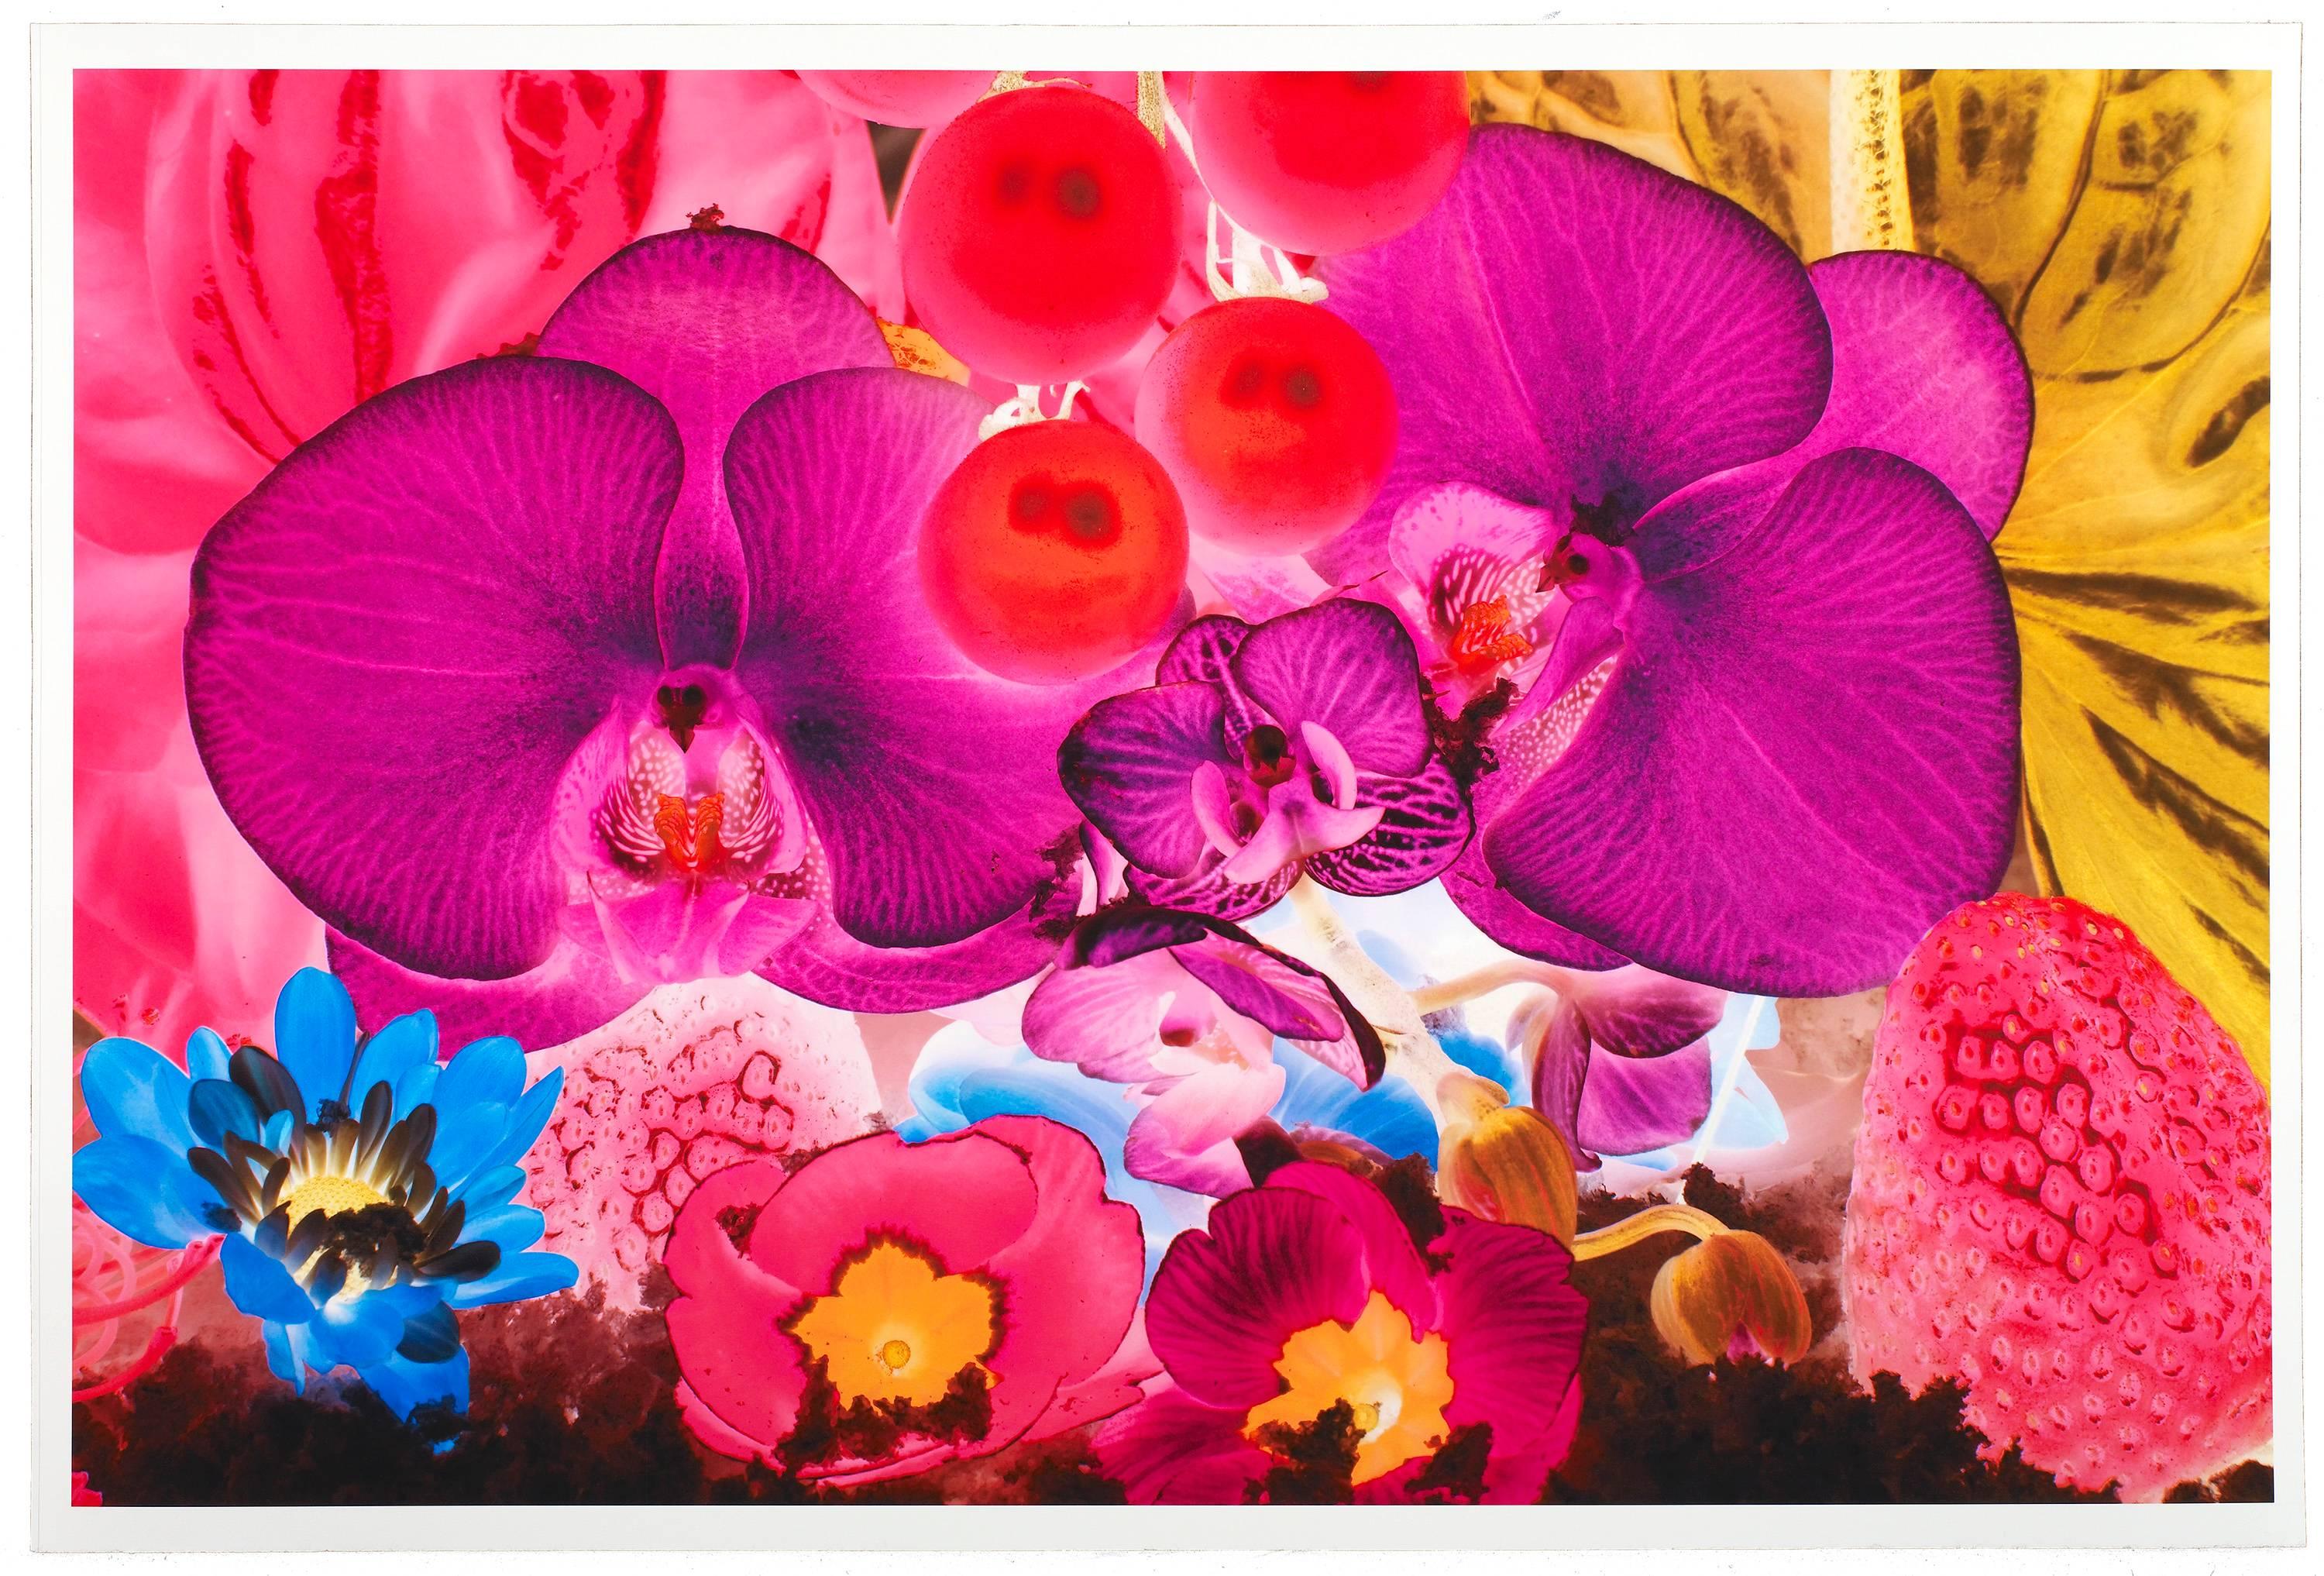 At the Far Edges of the Universe III - Print by Marc Quinn